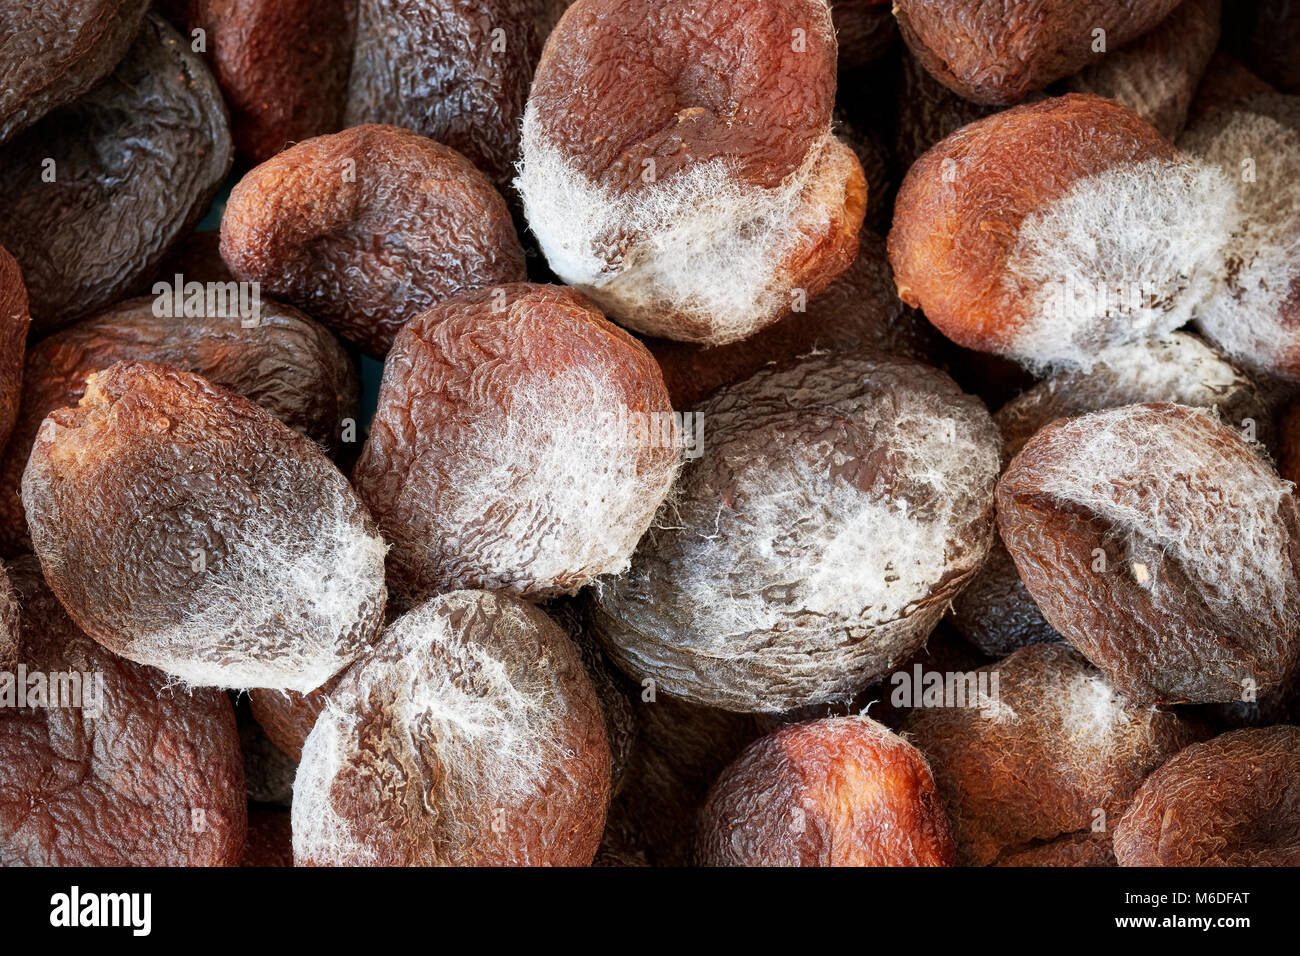 Close up picture of moldy dried apricots. Stock Photo